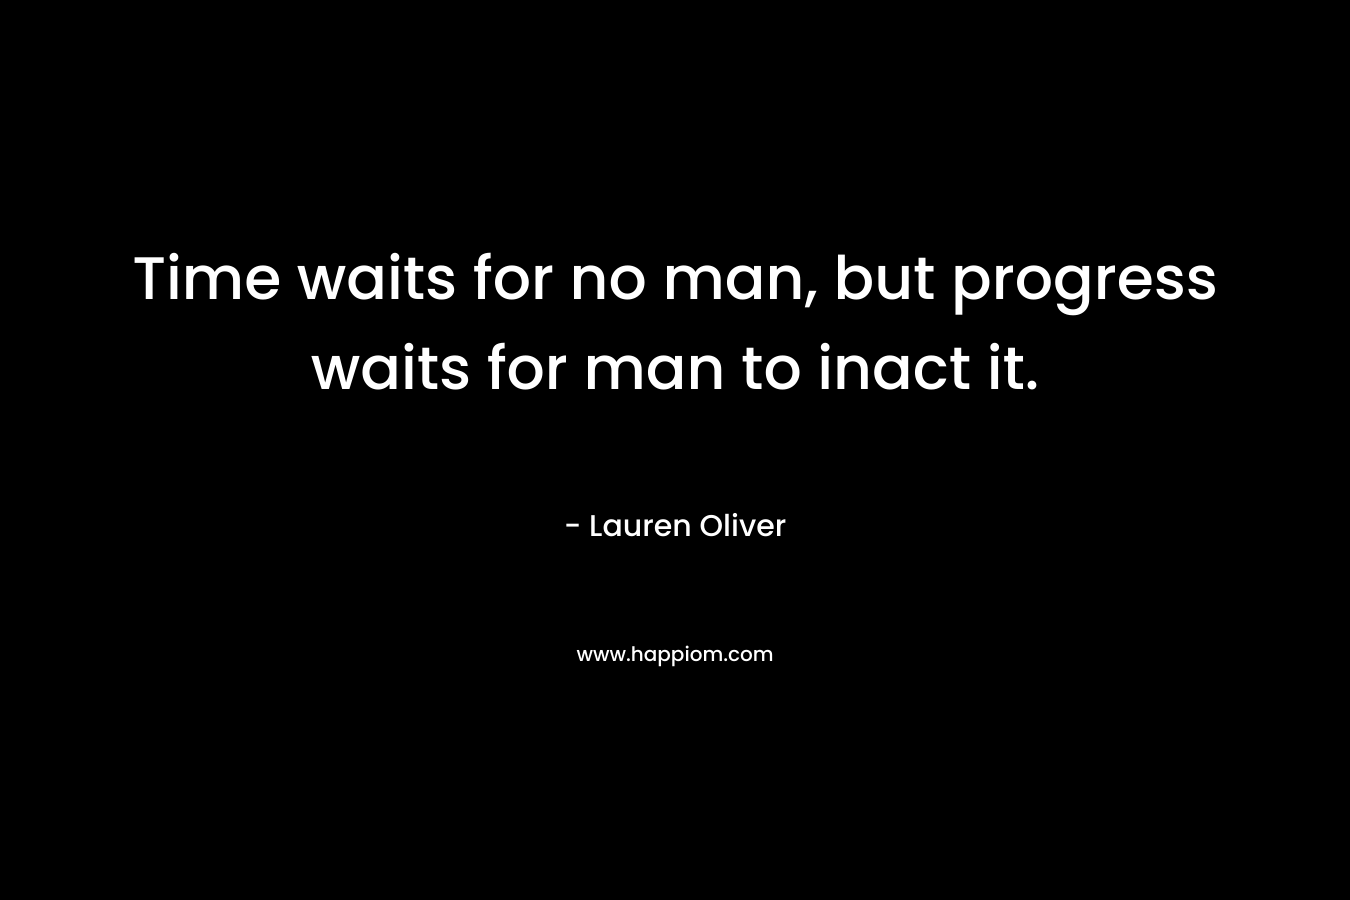 Time waits for no man, but progress waits for man to inact it.